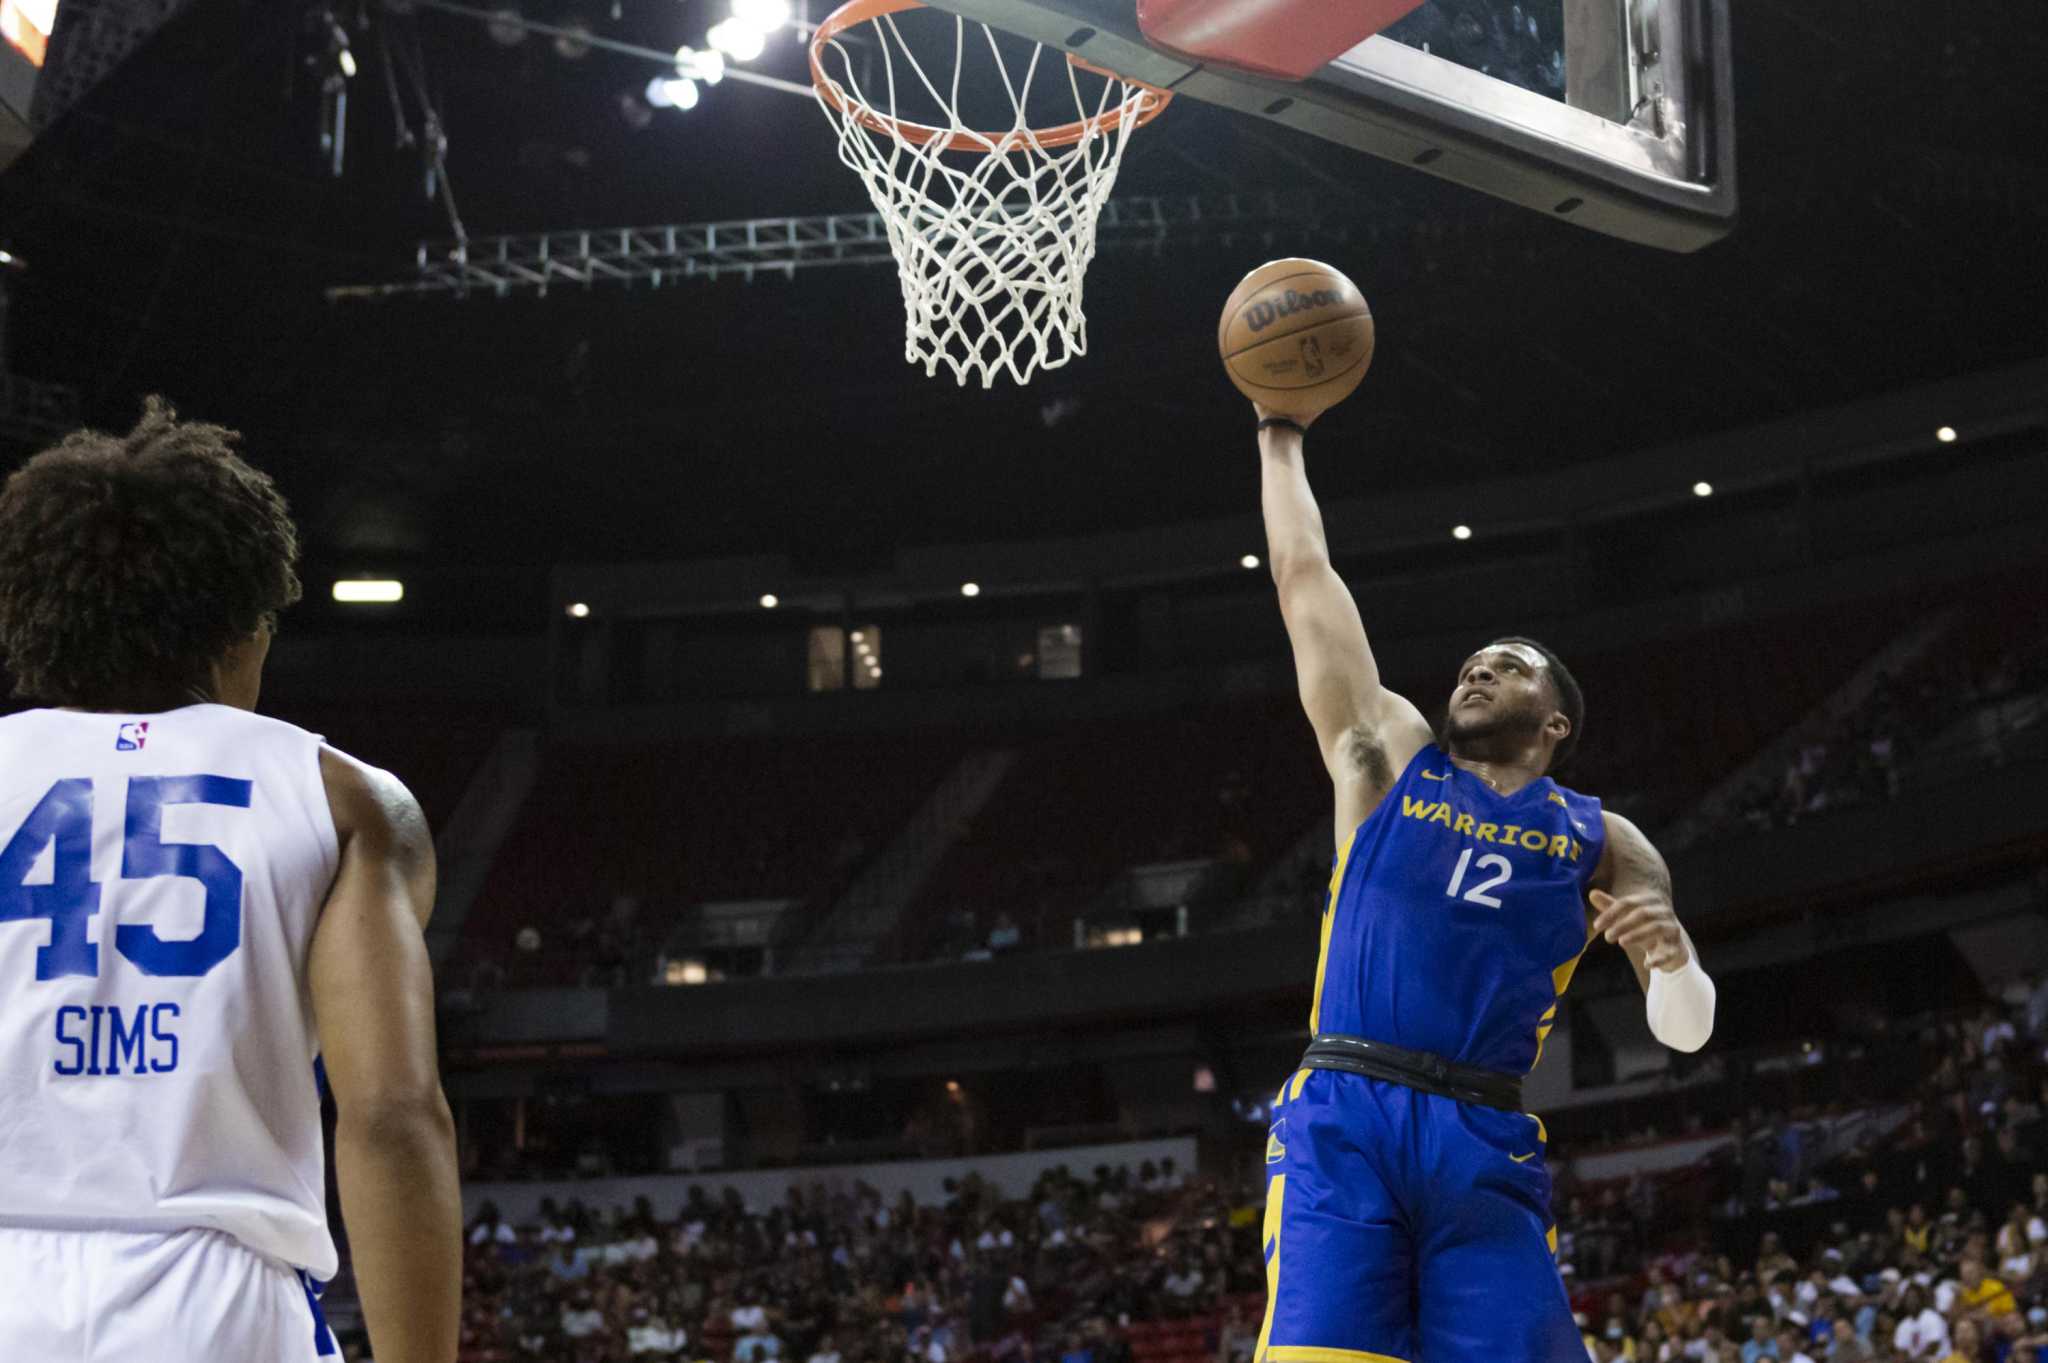 Done with two-way deals, Warriors' Weatherspoon eyes coveted NBA contract